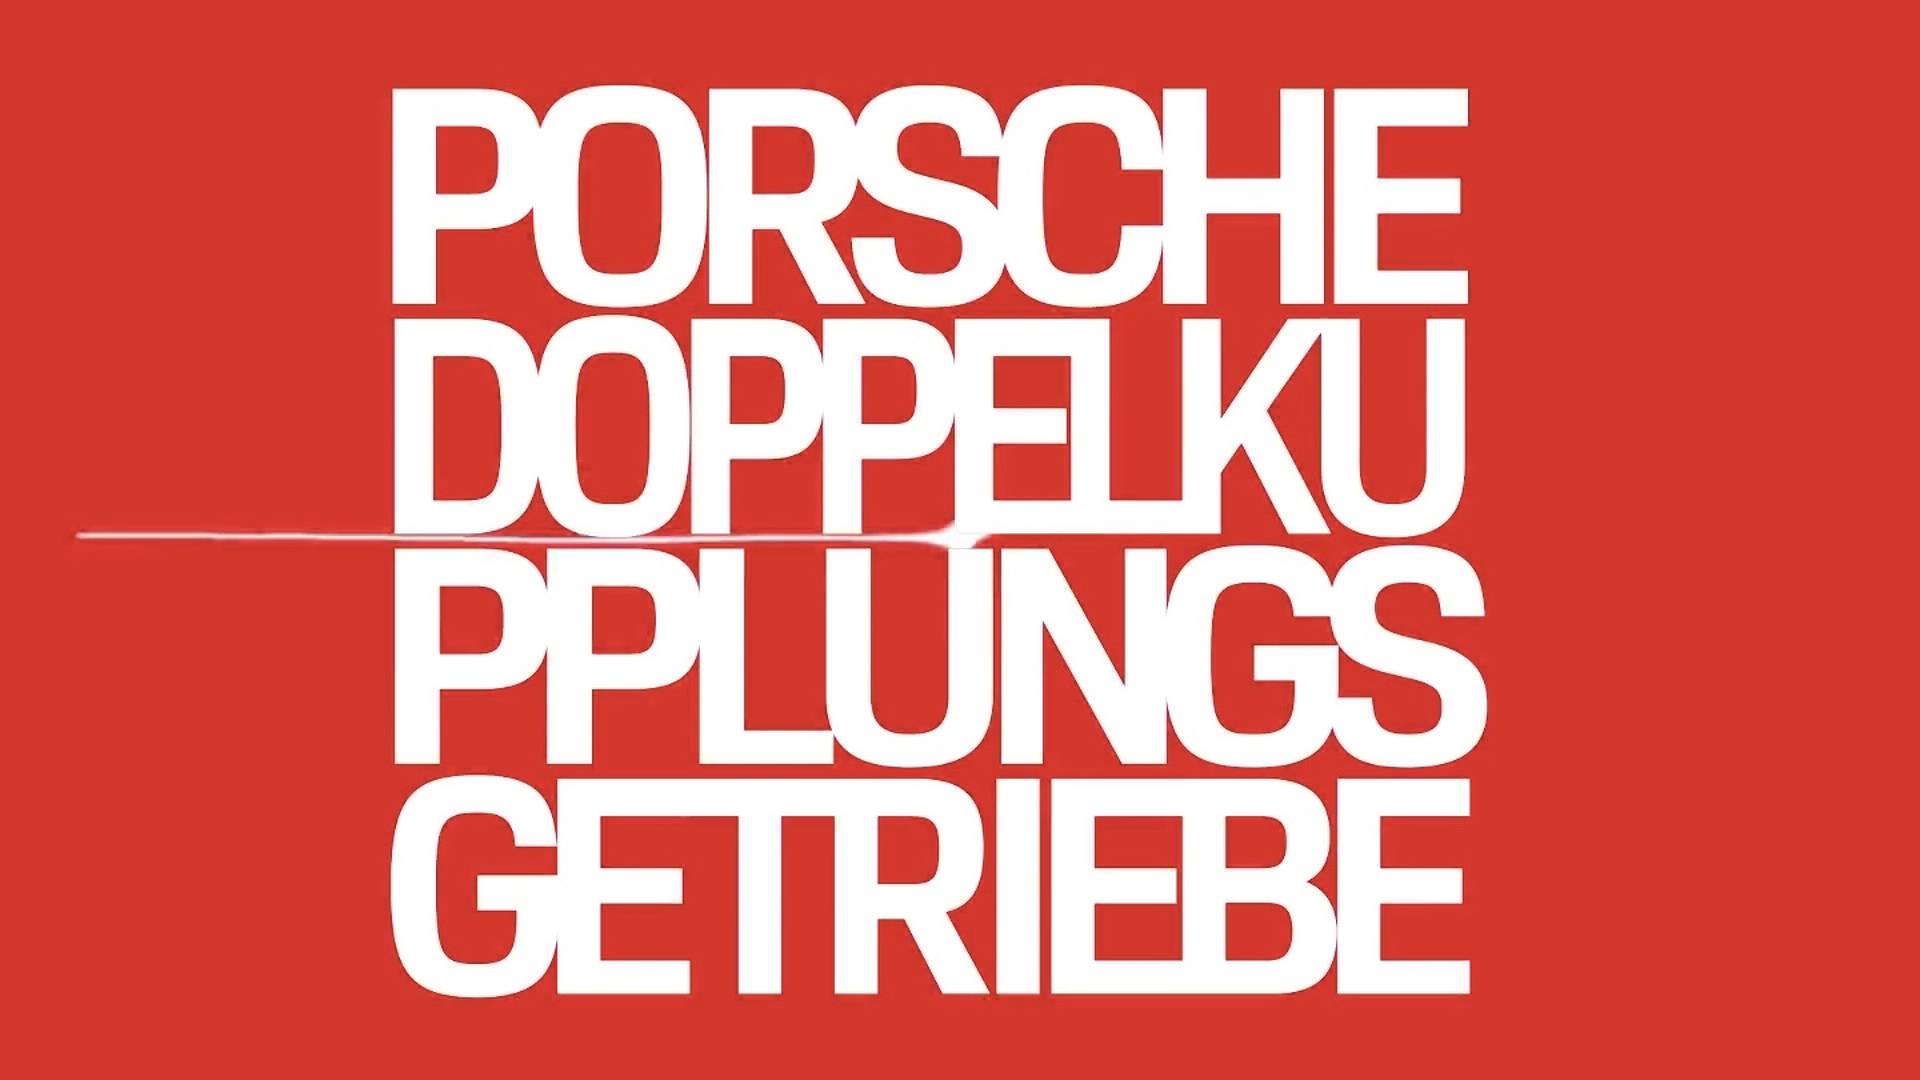 Porsche explains what PDK means and how to pronounce it